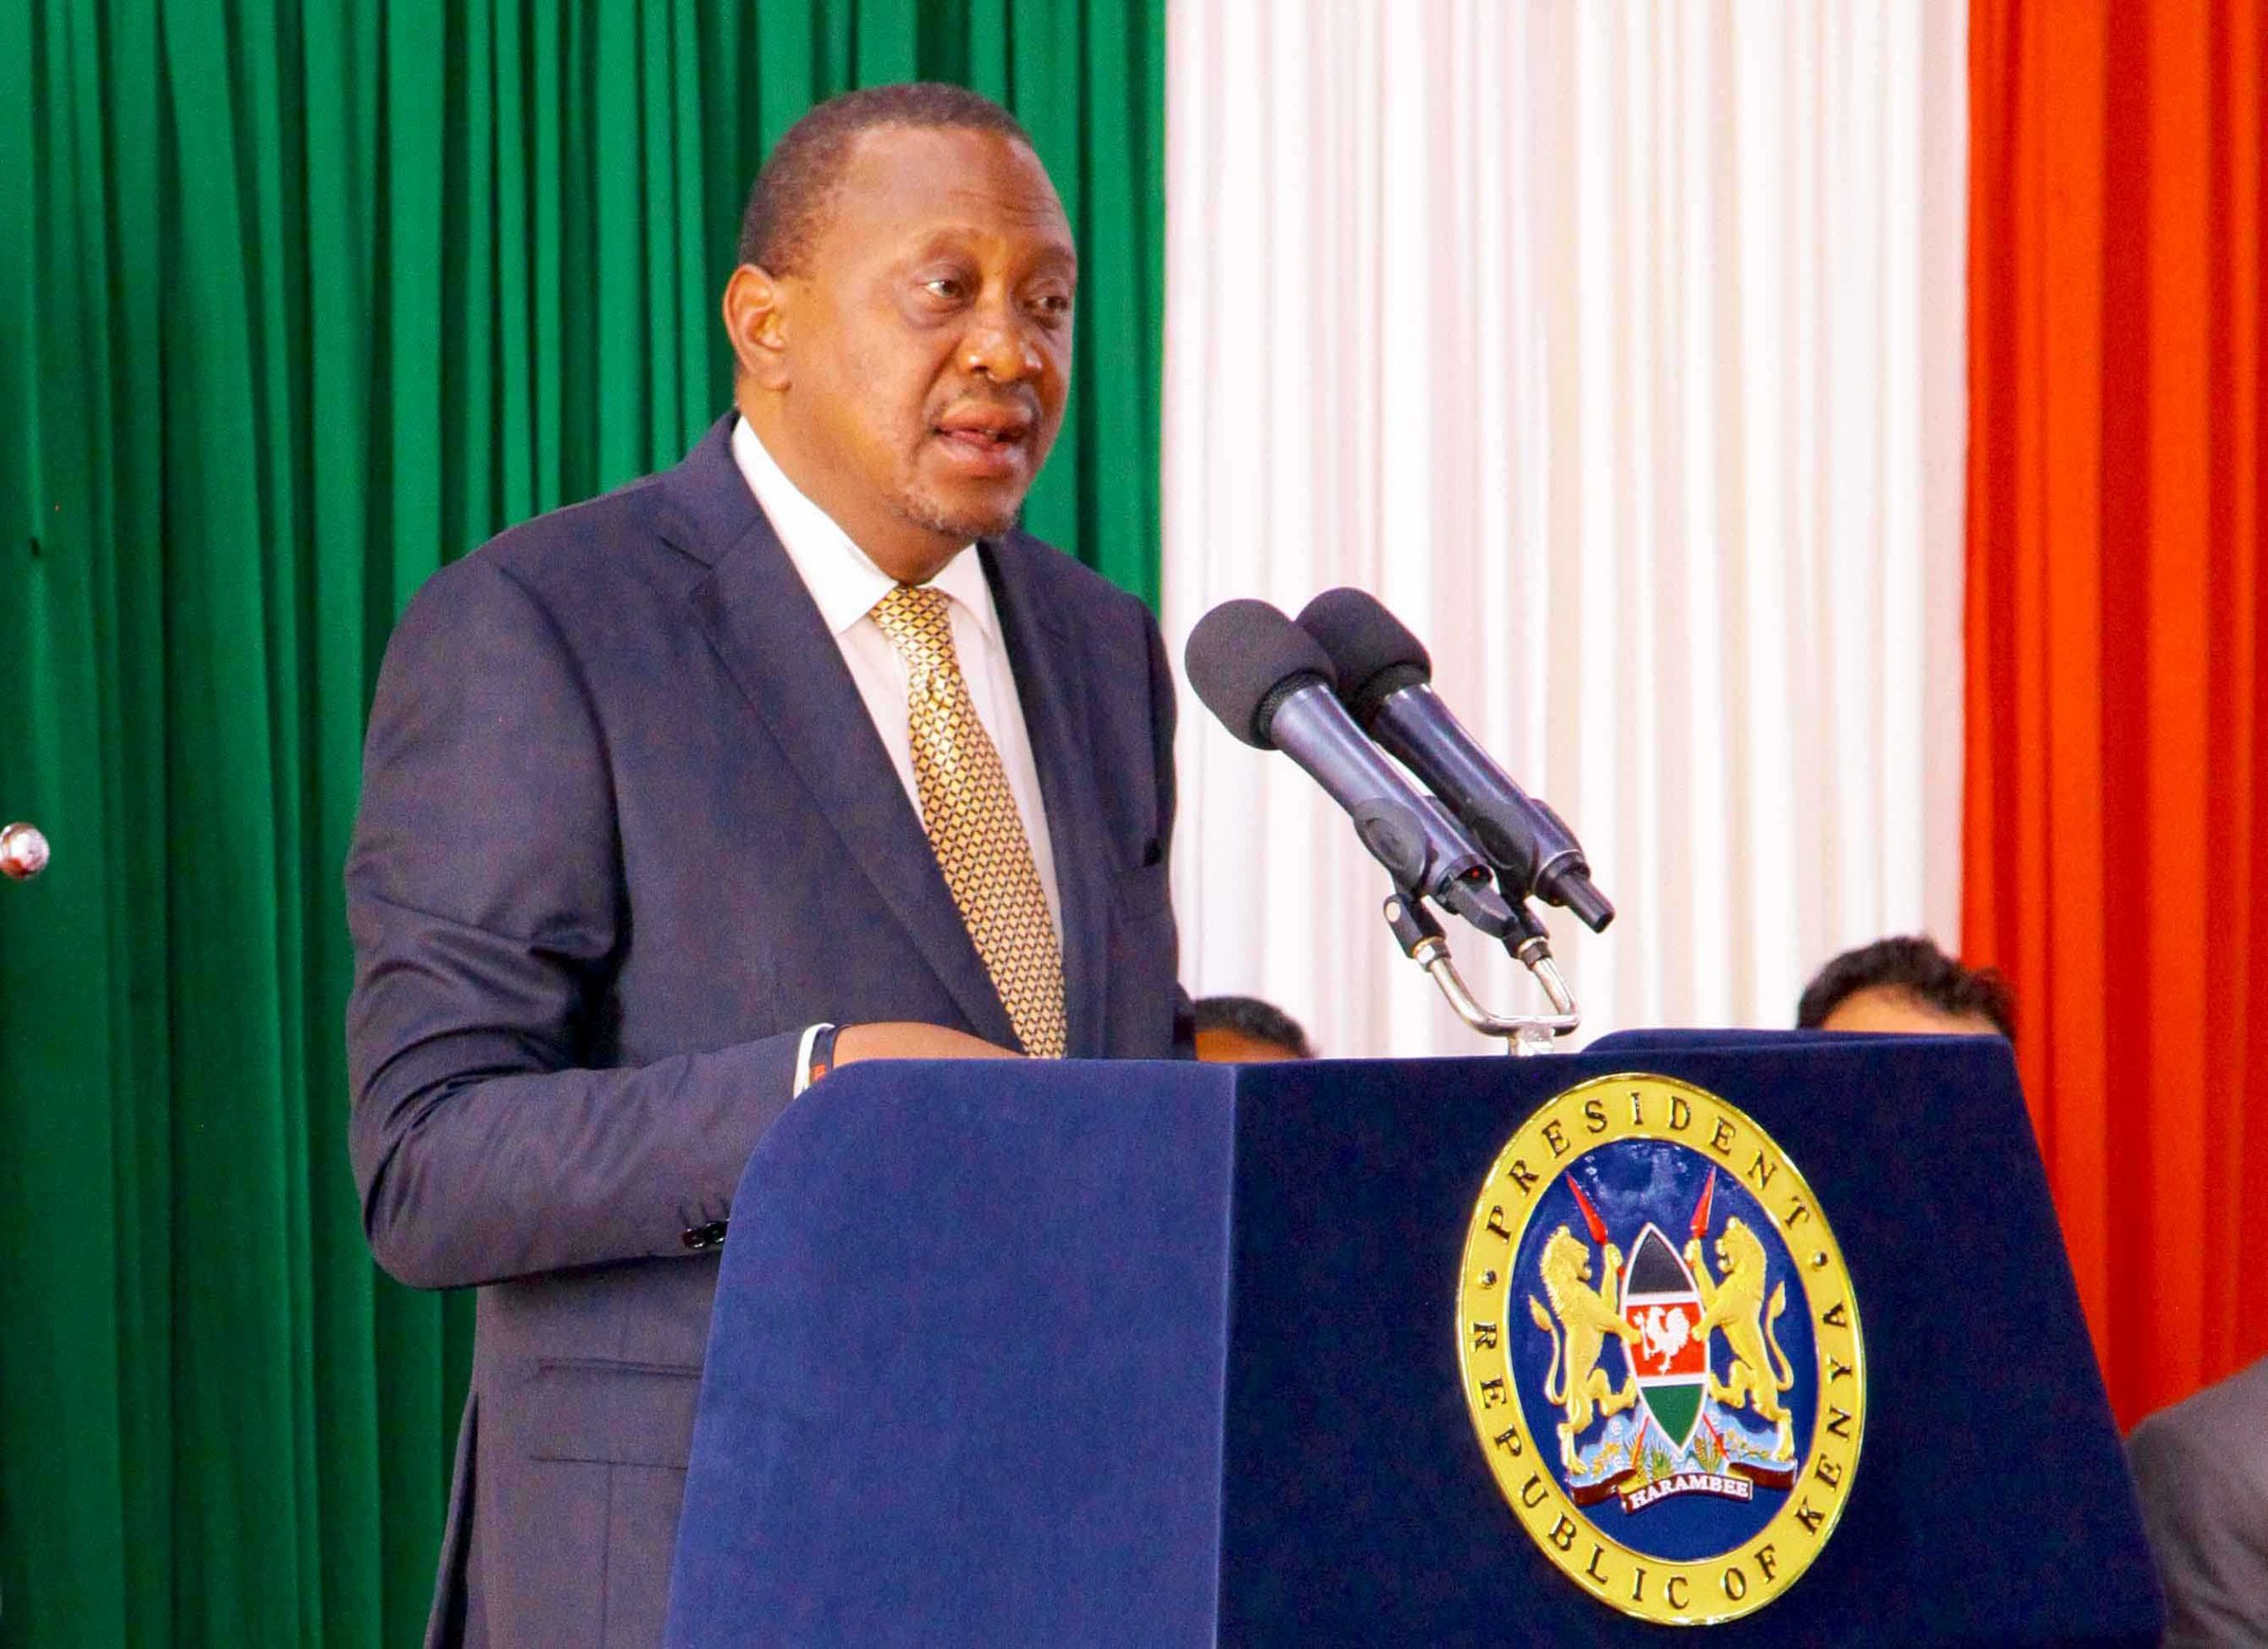 Kenya to commission a taskforce on Blockchain and IoT